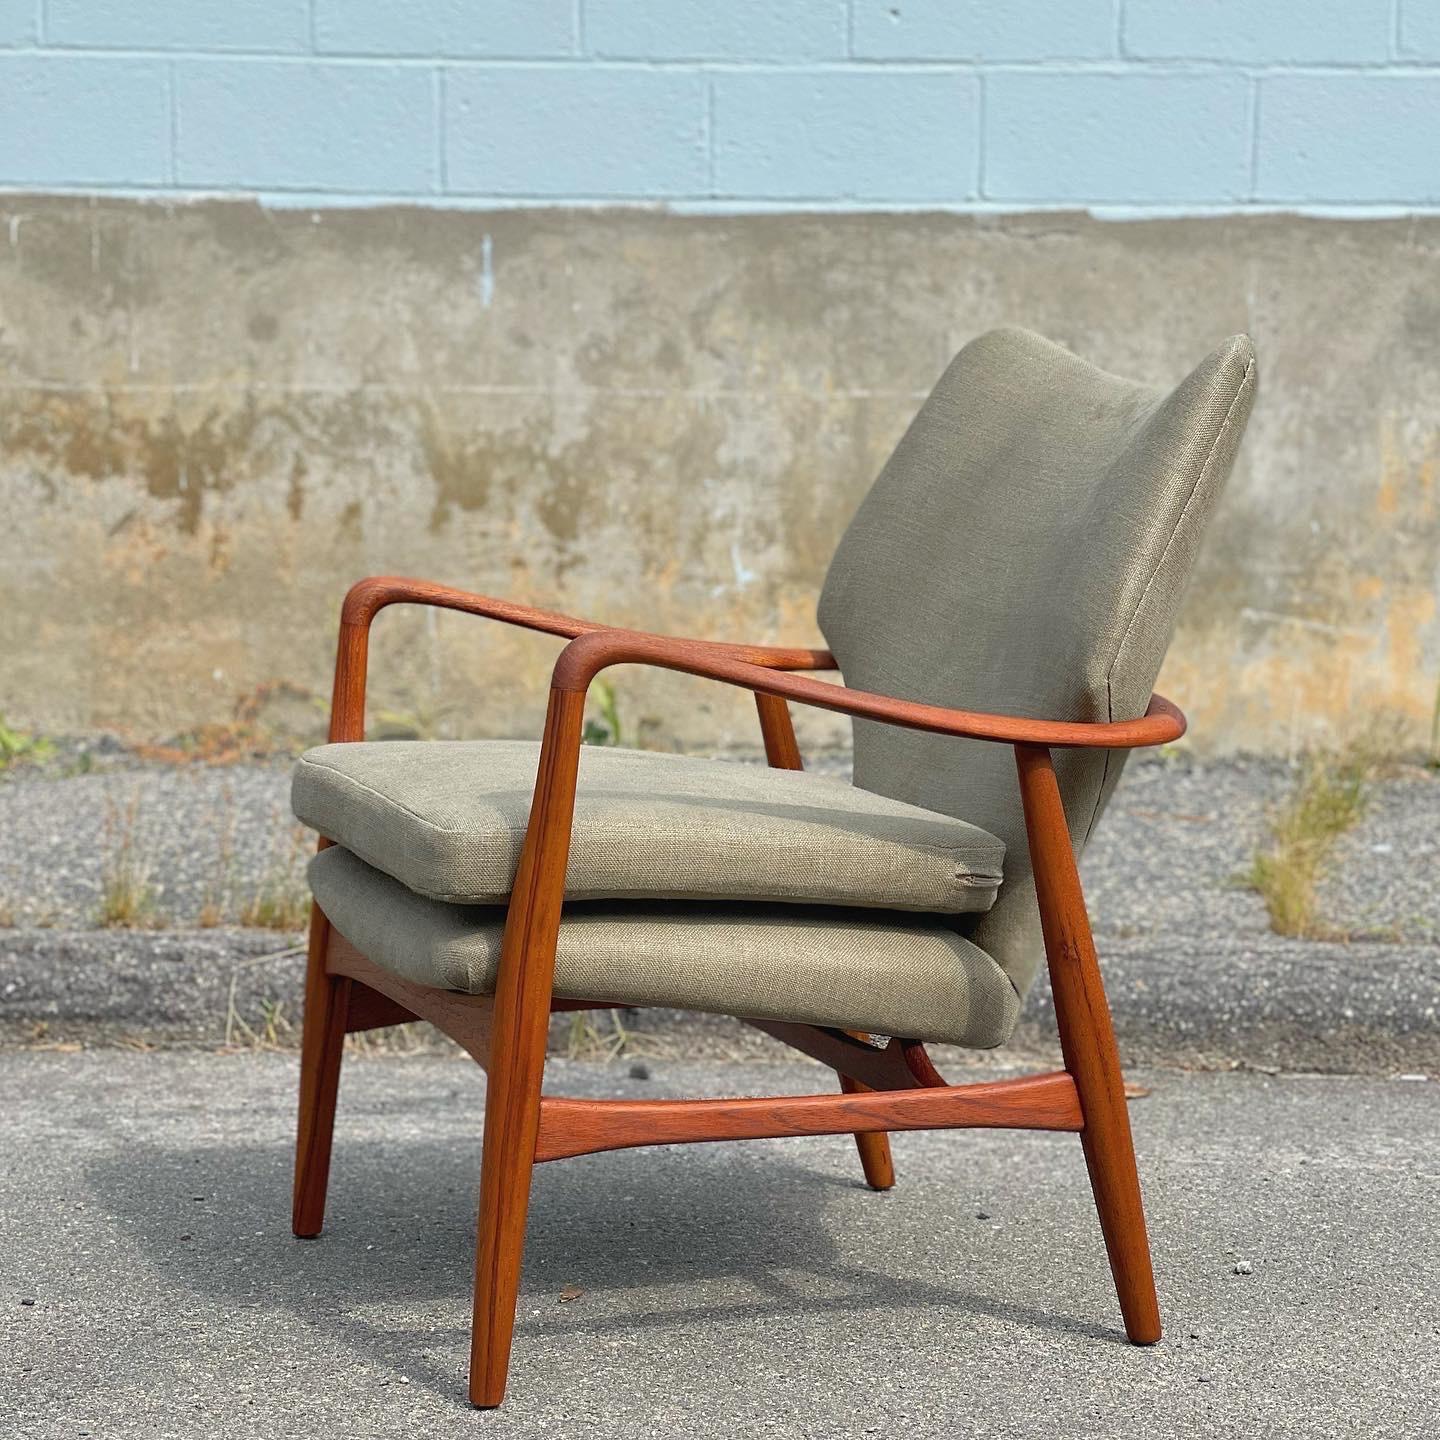 Early 1950s or late 1940s Ib Madsen & Acton Schubell designed lounge chair. I love the sculptural frame with ribbon-like narrow arms that I lightly hand sanded to keep some patina on the teak and show the age. The teak legs have amazing grain lines.